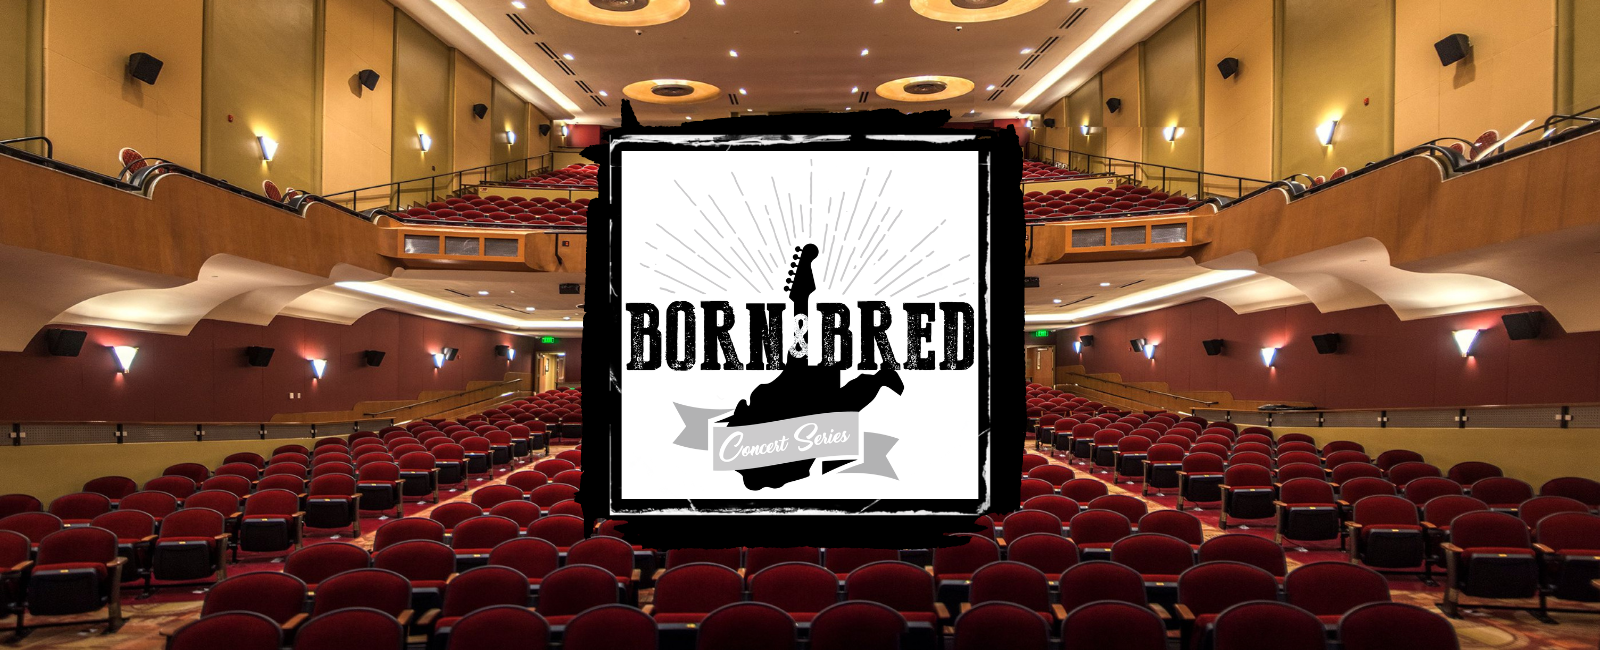 Born & Bred Concert Series Tickets Are Now Available!